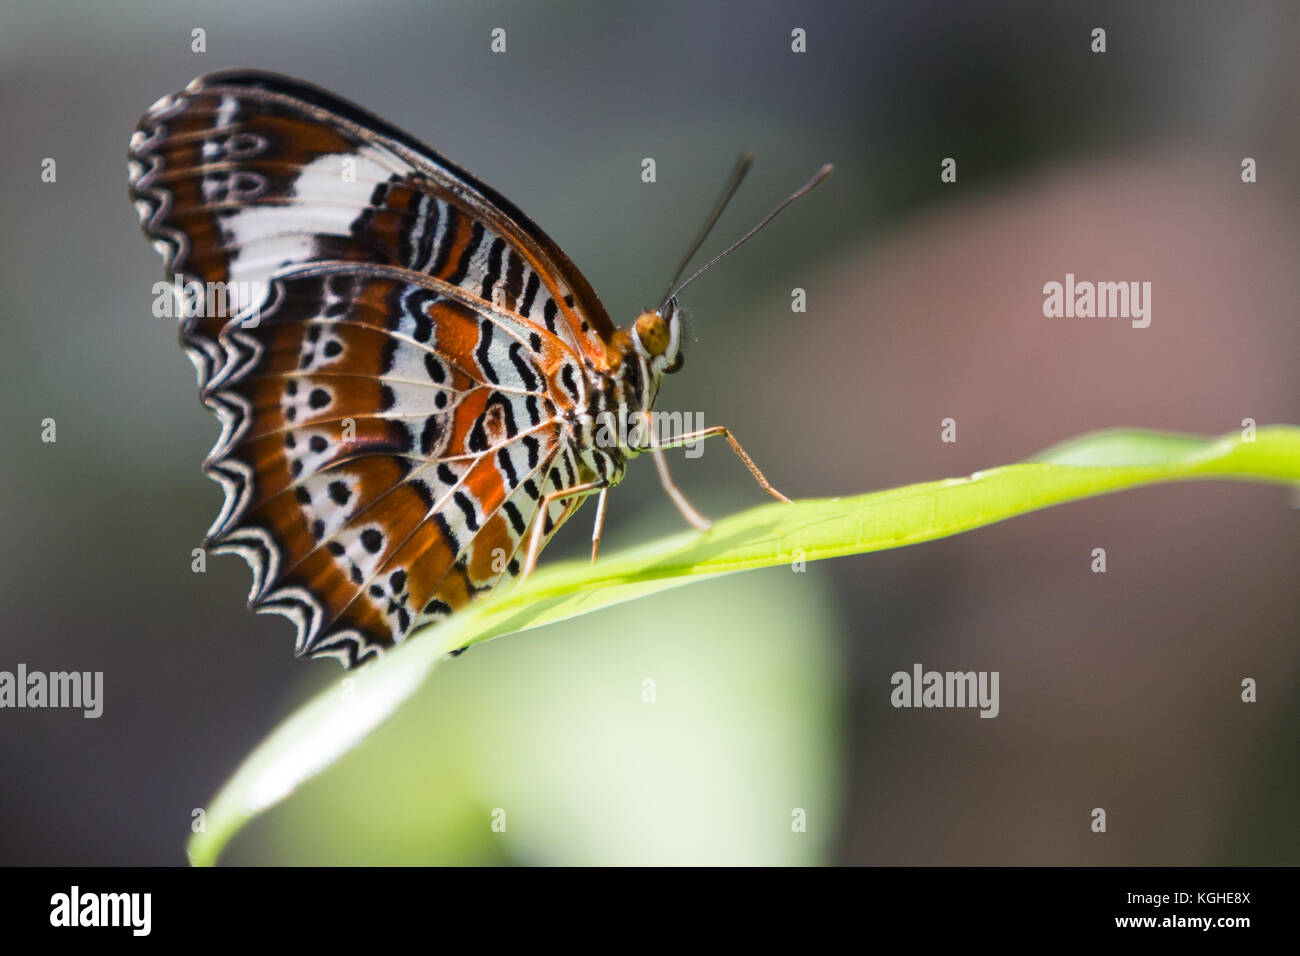 A butterfly up close, green background. Stock Photo